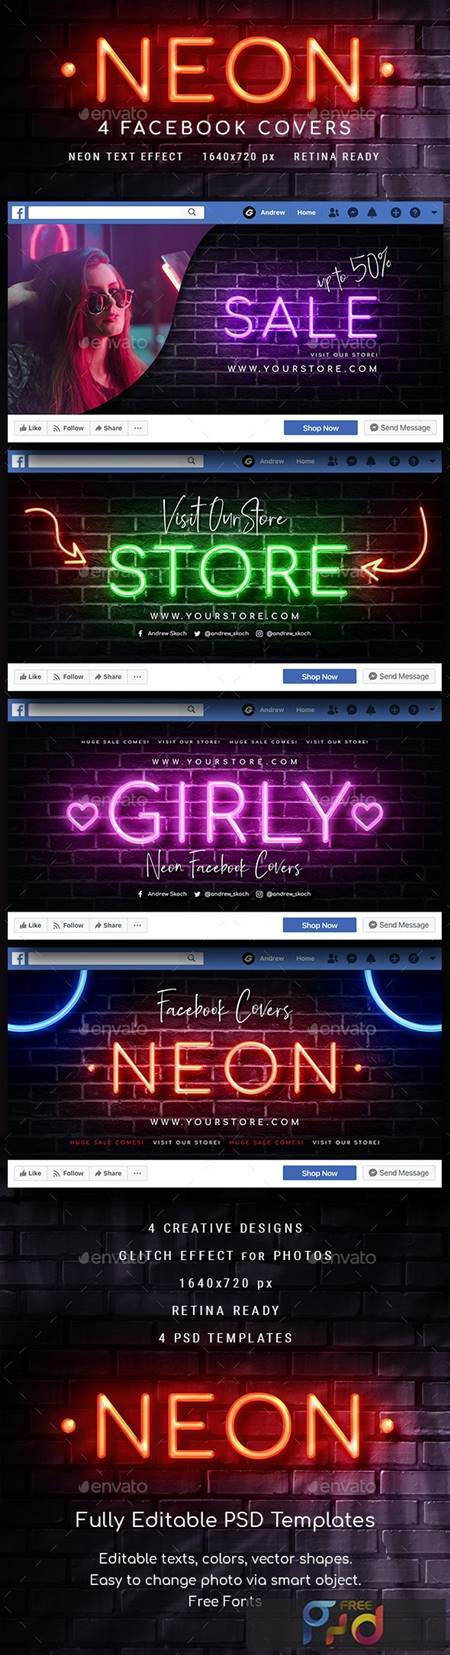 Neon Facebook Covers 26405900 1